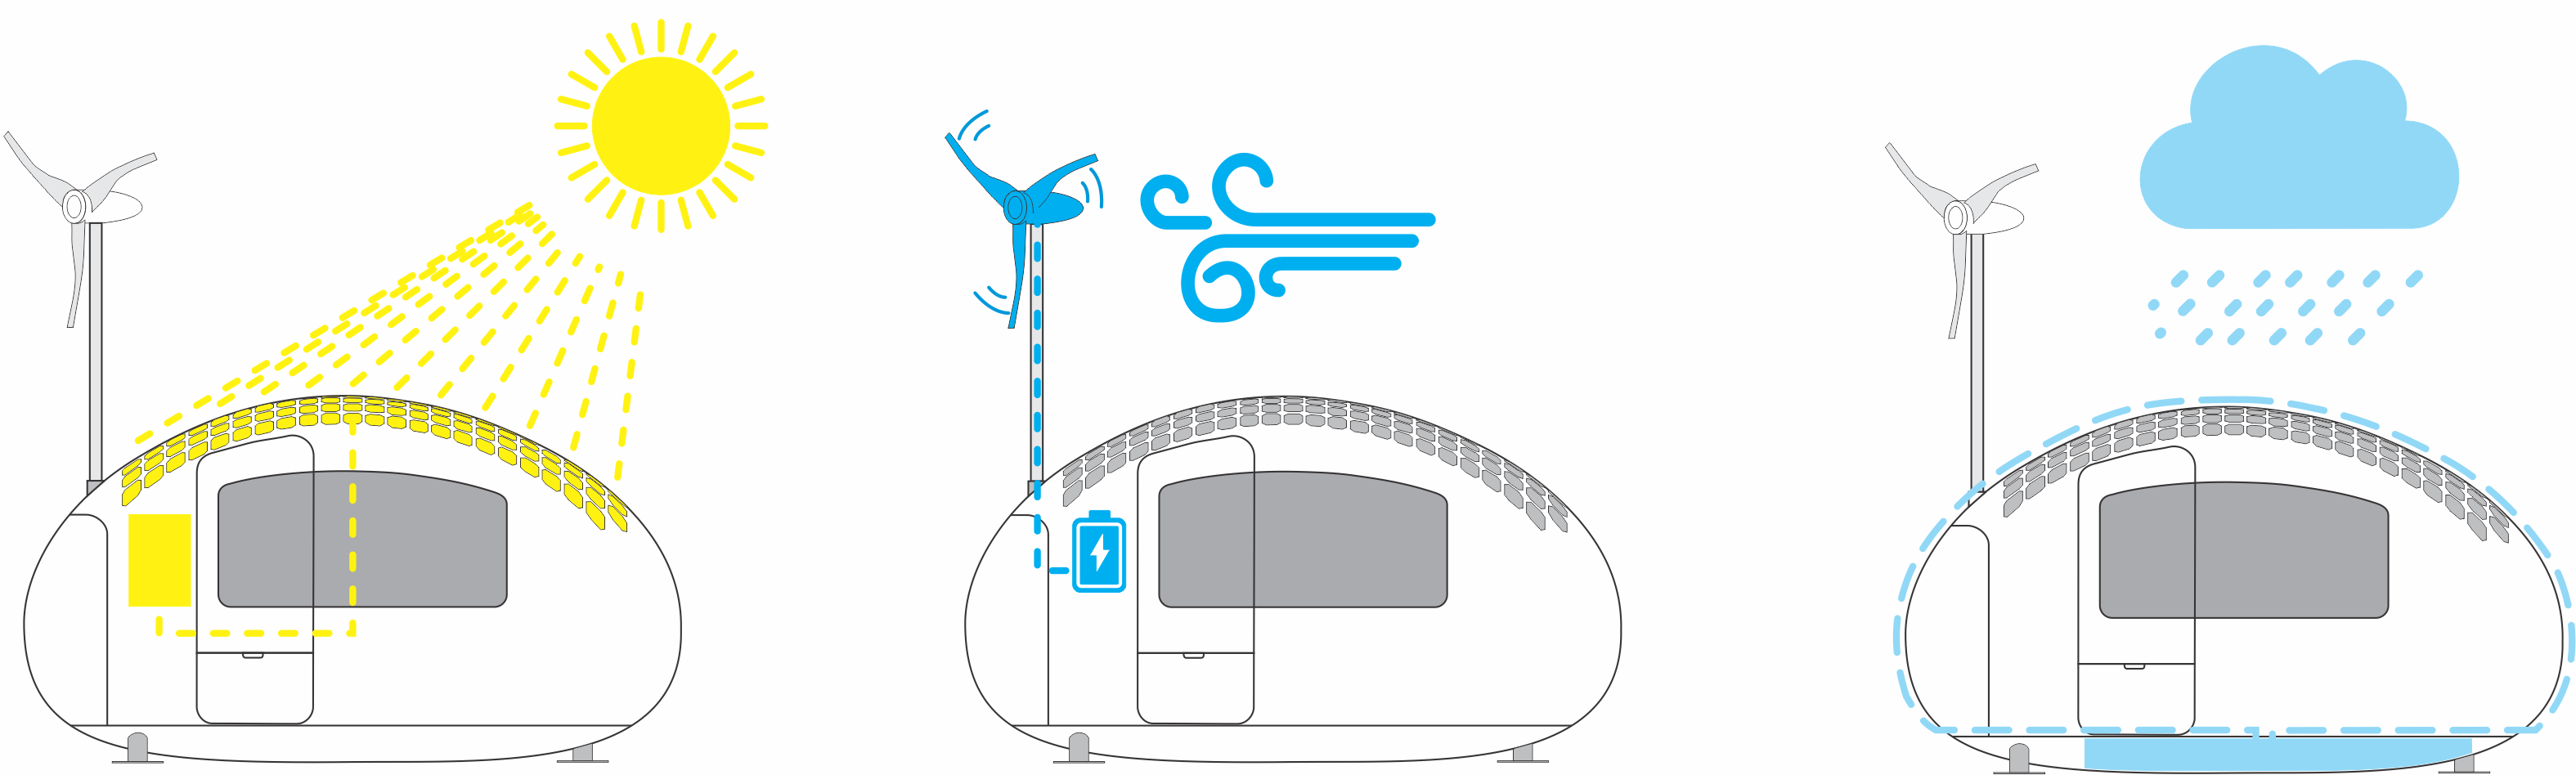 A scheme showing how the Ecocapsule runs on solar and wind energy and filters water.